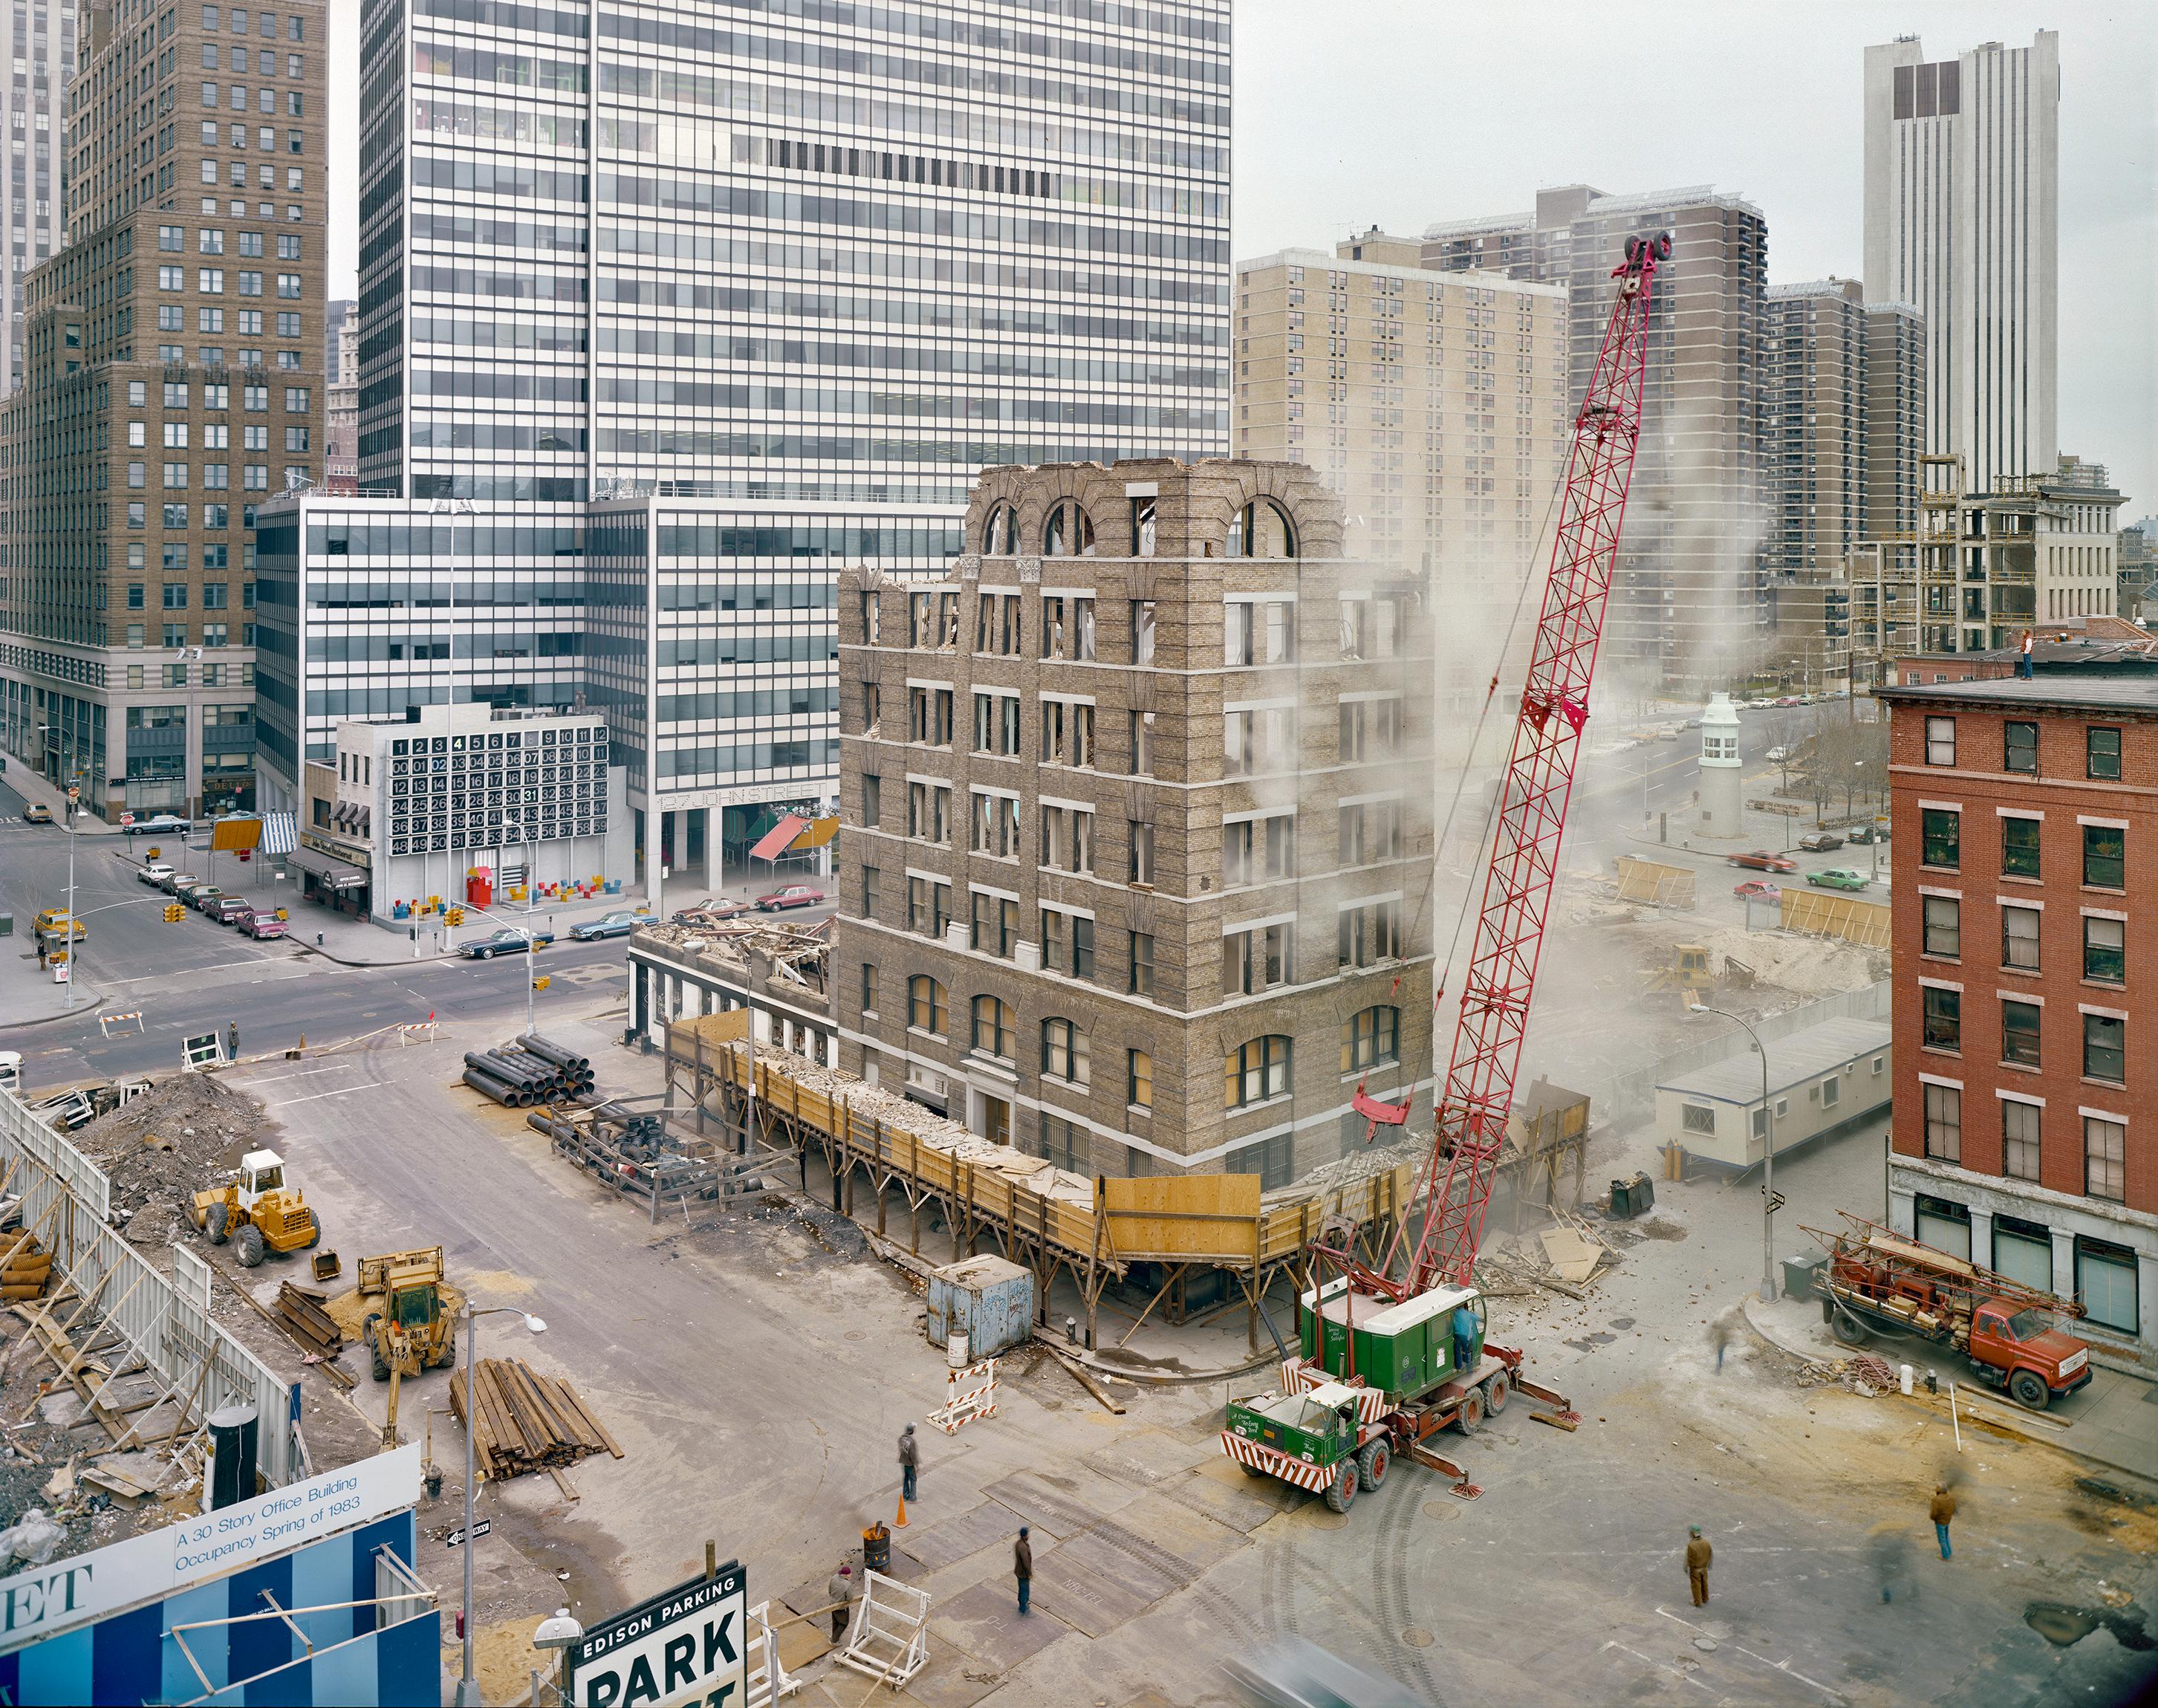 Andrew Moore Landscape Photograph - Destruction of the Coffee Excahange NYC 1981 (30"x40")